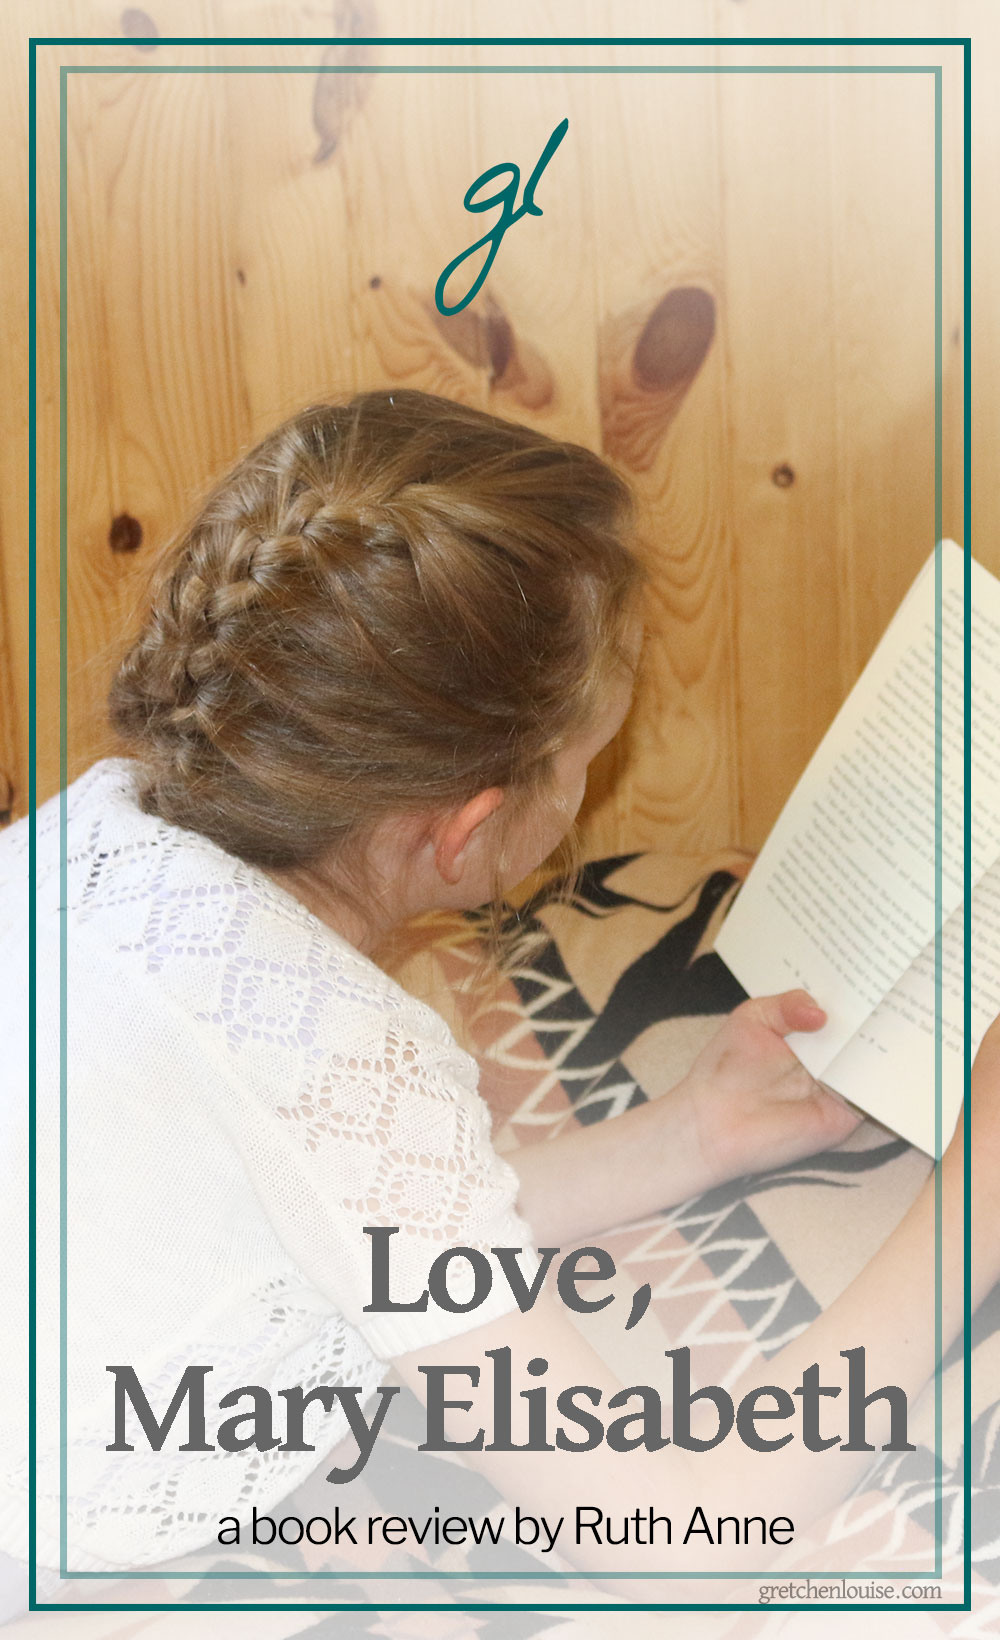 Love, Mary Elisabeth is a heart-warming story of a young girl who, after her mother is diagnosed with Tuberculosis, is whisked off to her uncle’s farm where she is safe.

#LoveMaryElisabeth via @GretLouise